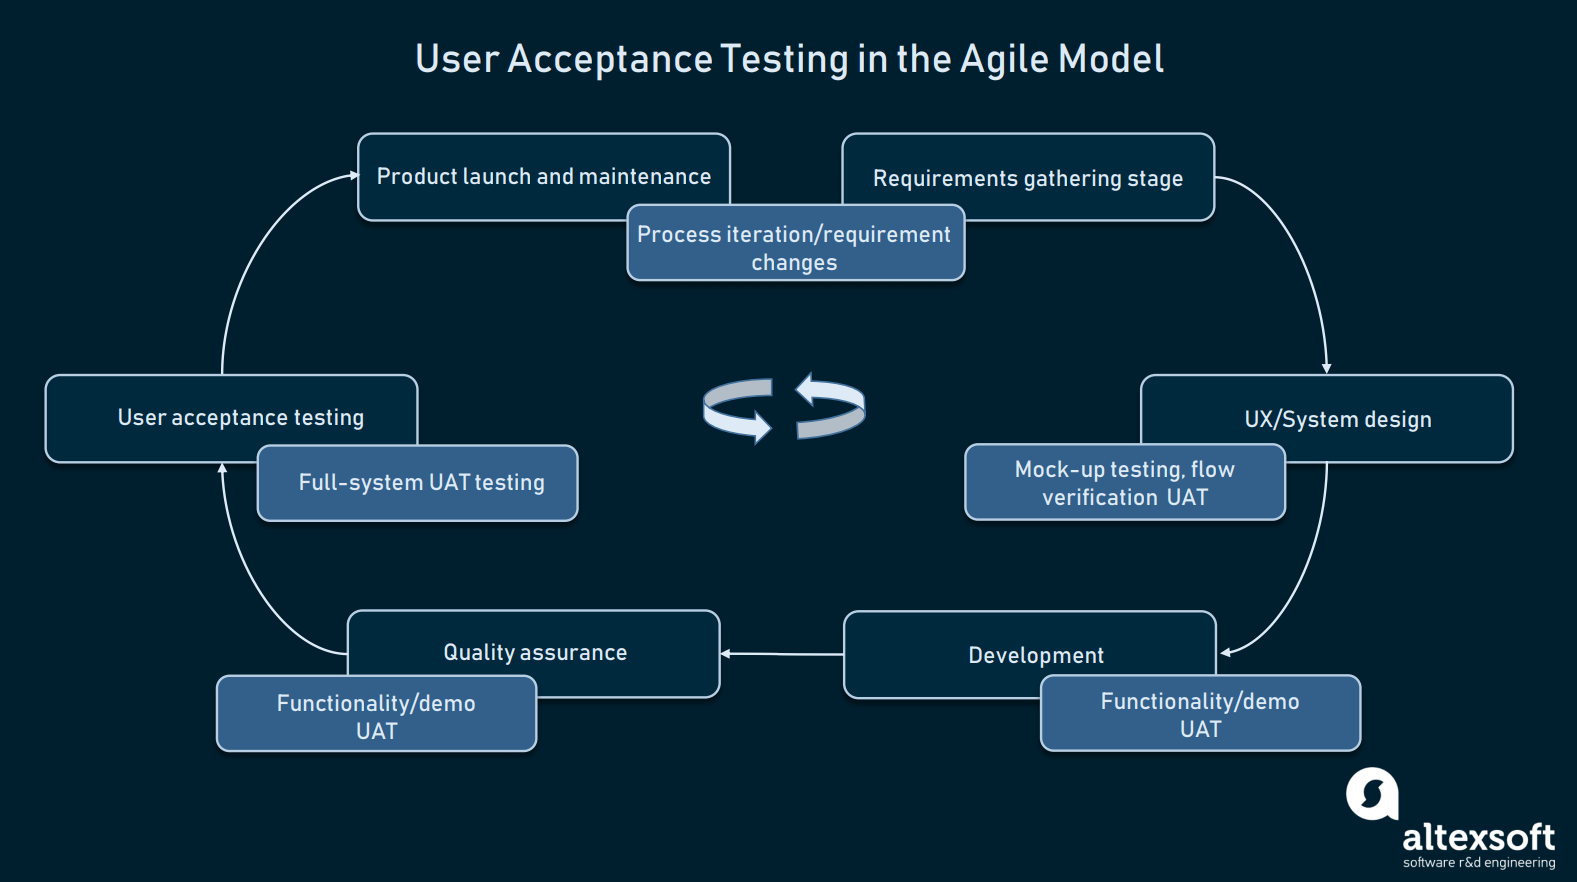 How To Conduct User Acceptance Testing | Altexsoft Within User Acceptance Testing Feedback Report Template